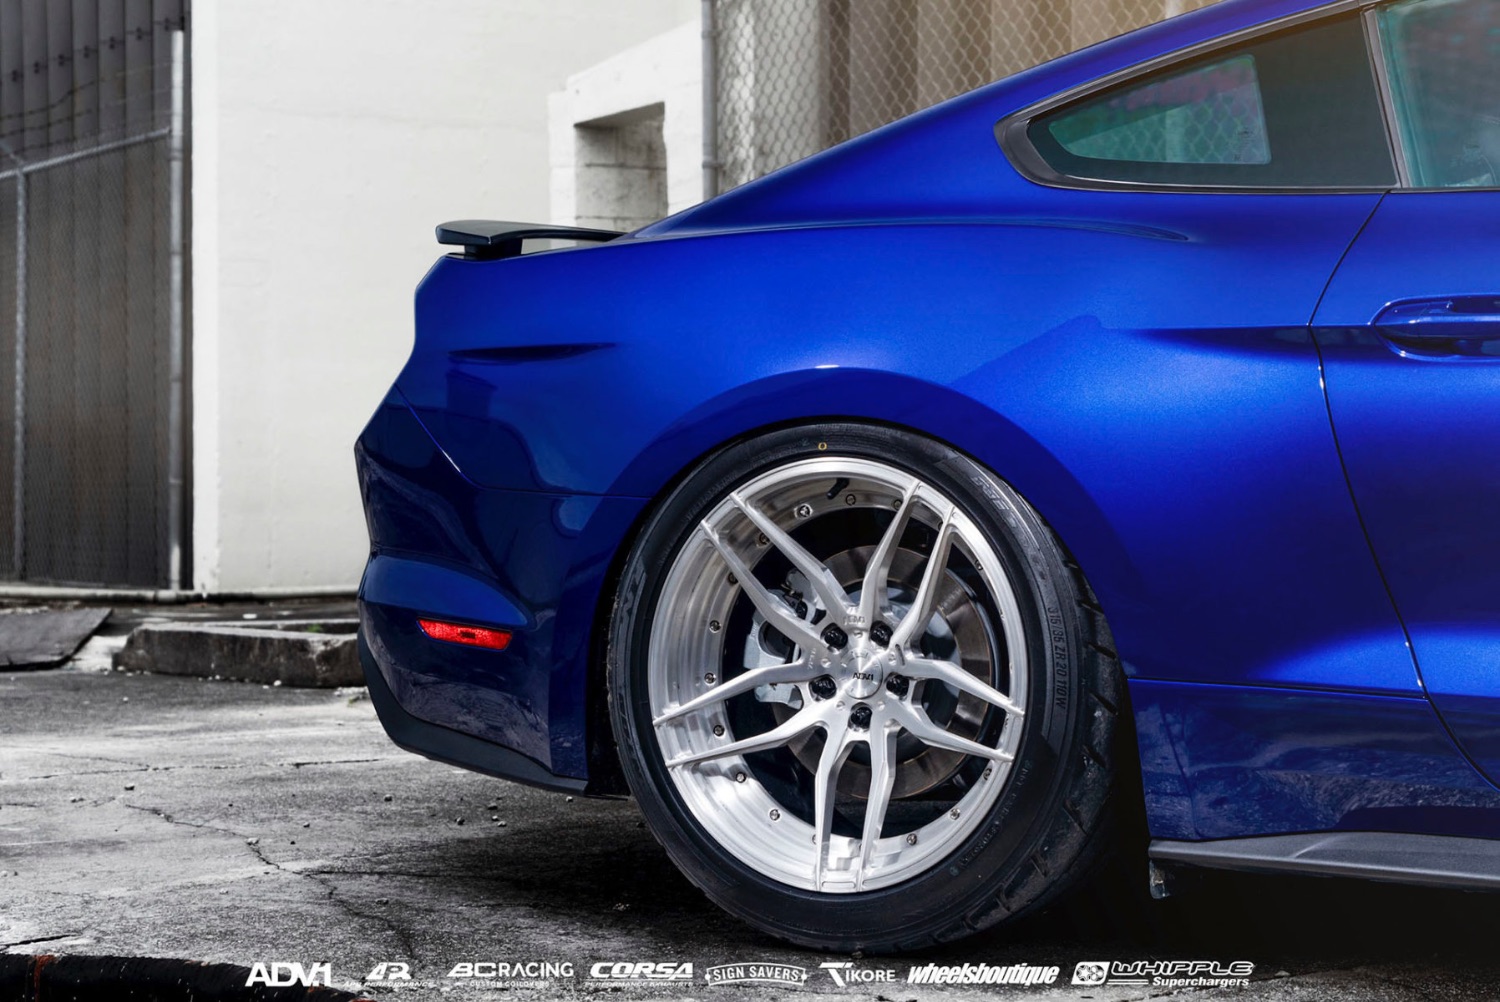 ford-mustang-5_0-whipple-supercharger-corsa-performance-exhaust-bc-racing-coilovers-nitto-tire-apr-splitter-adv1-wheels-california-modified-aftermarket-wallpaper-g